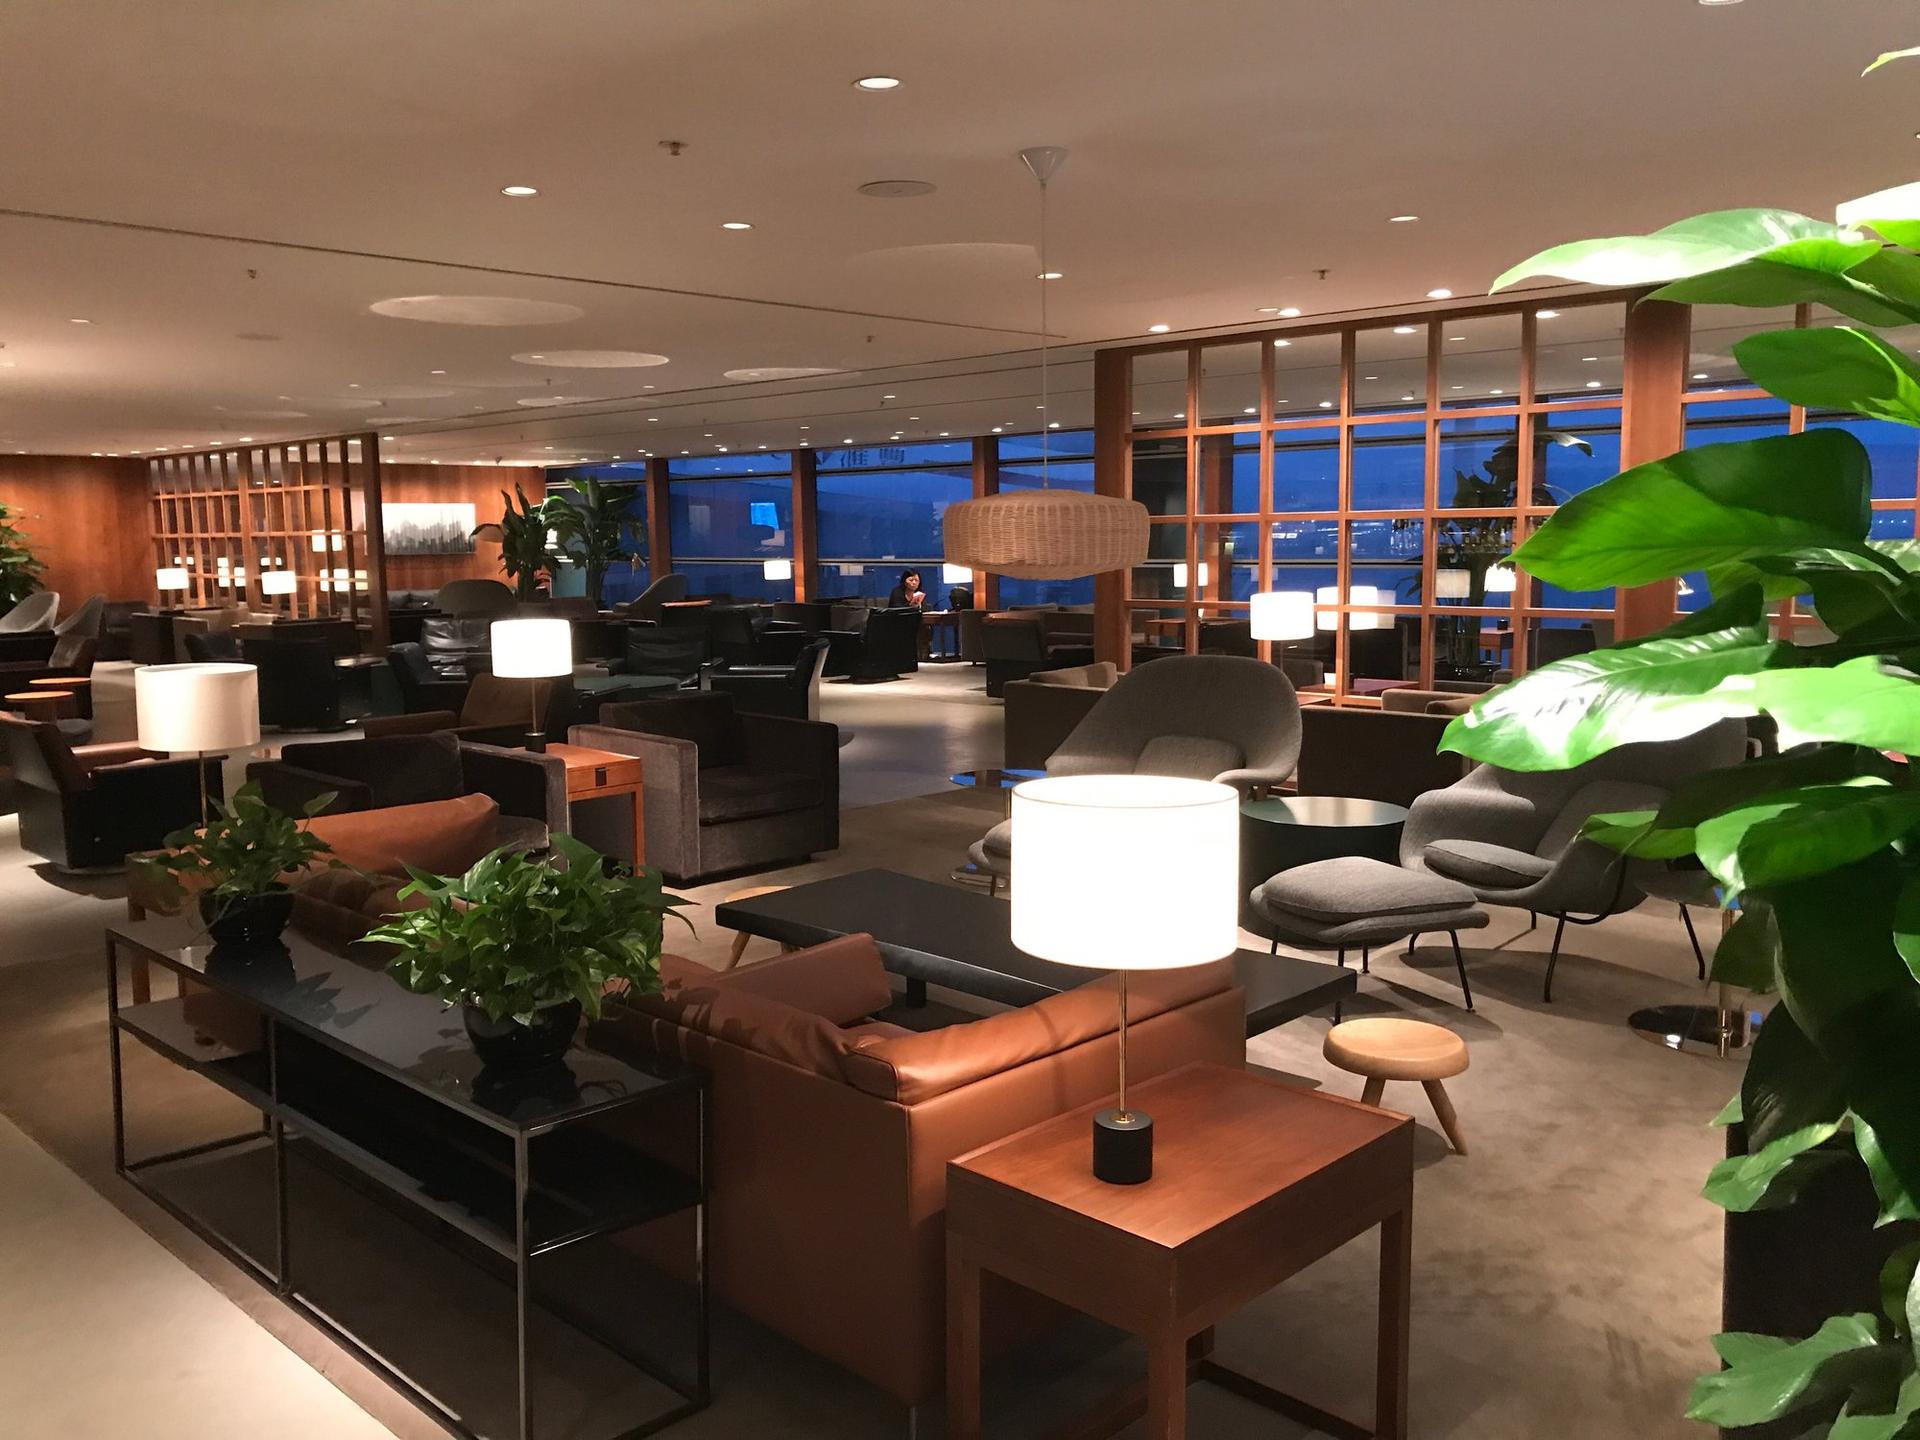 Cathay Pacific The Pier Business Class Lounge image 58 of 61